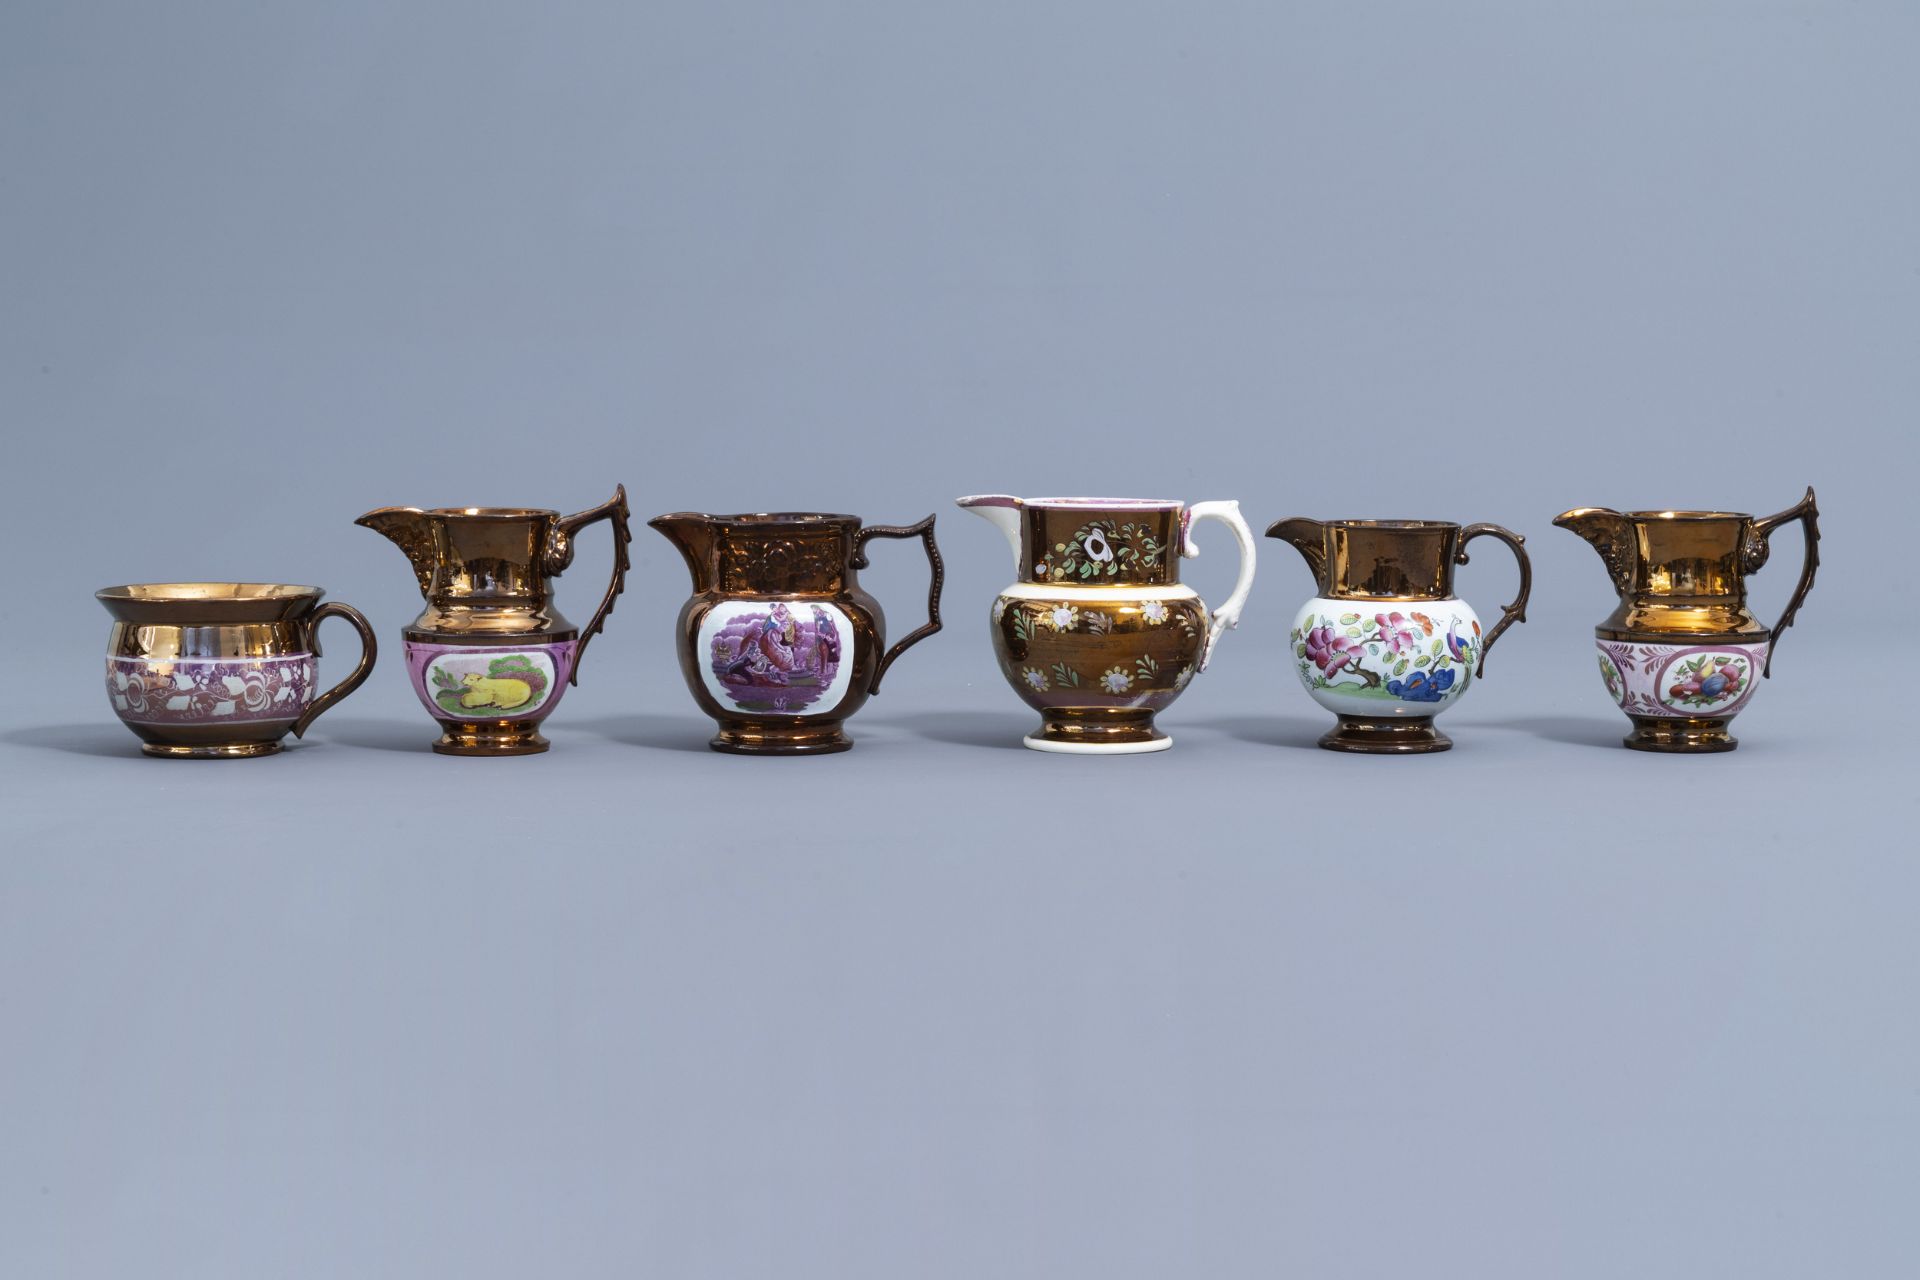 A varied collection of English lustreware items, 19th C. - Image 32 of 44